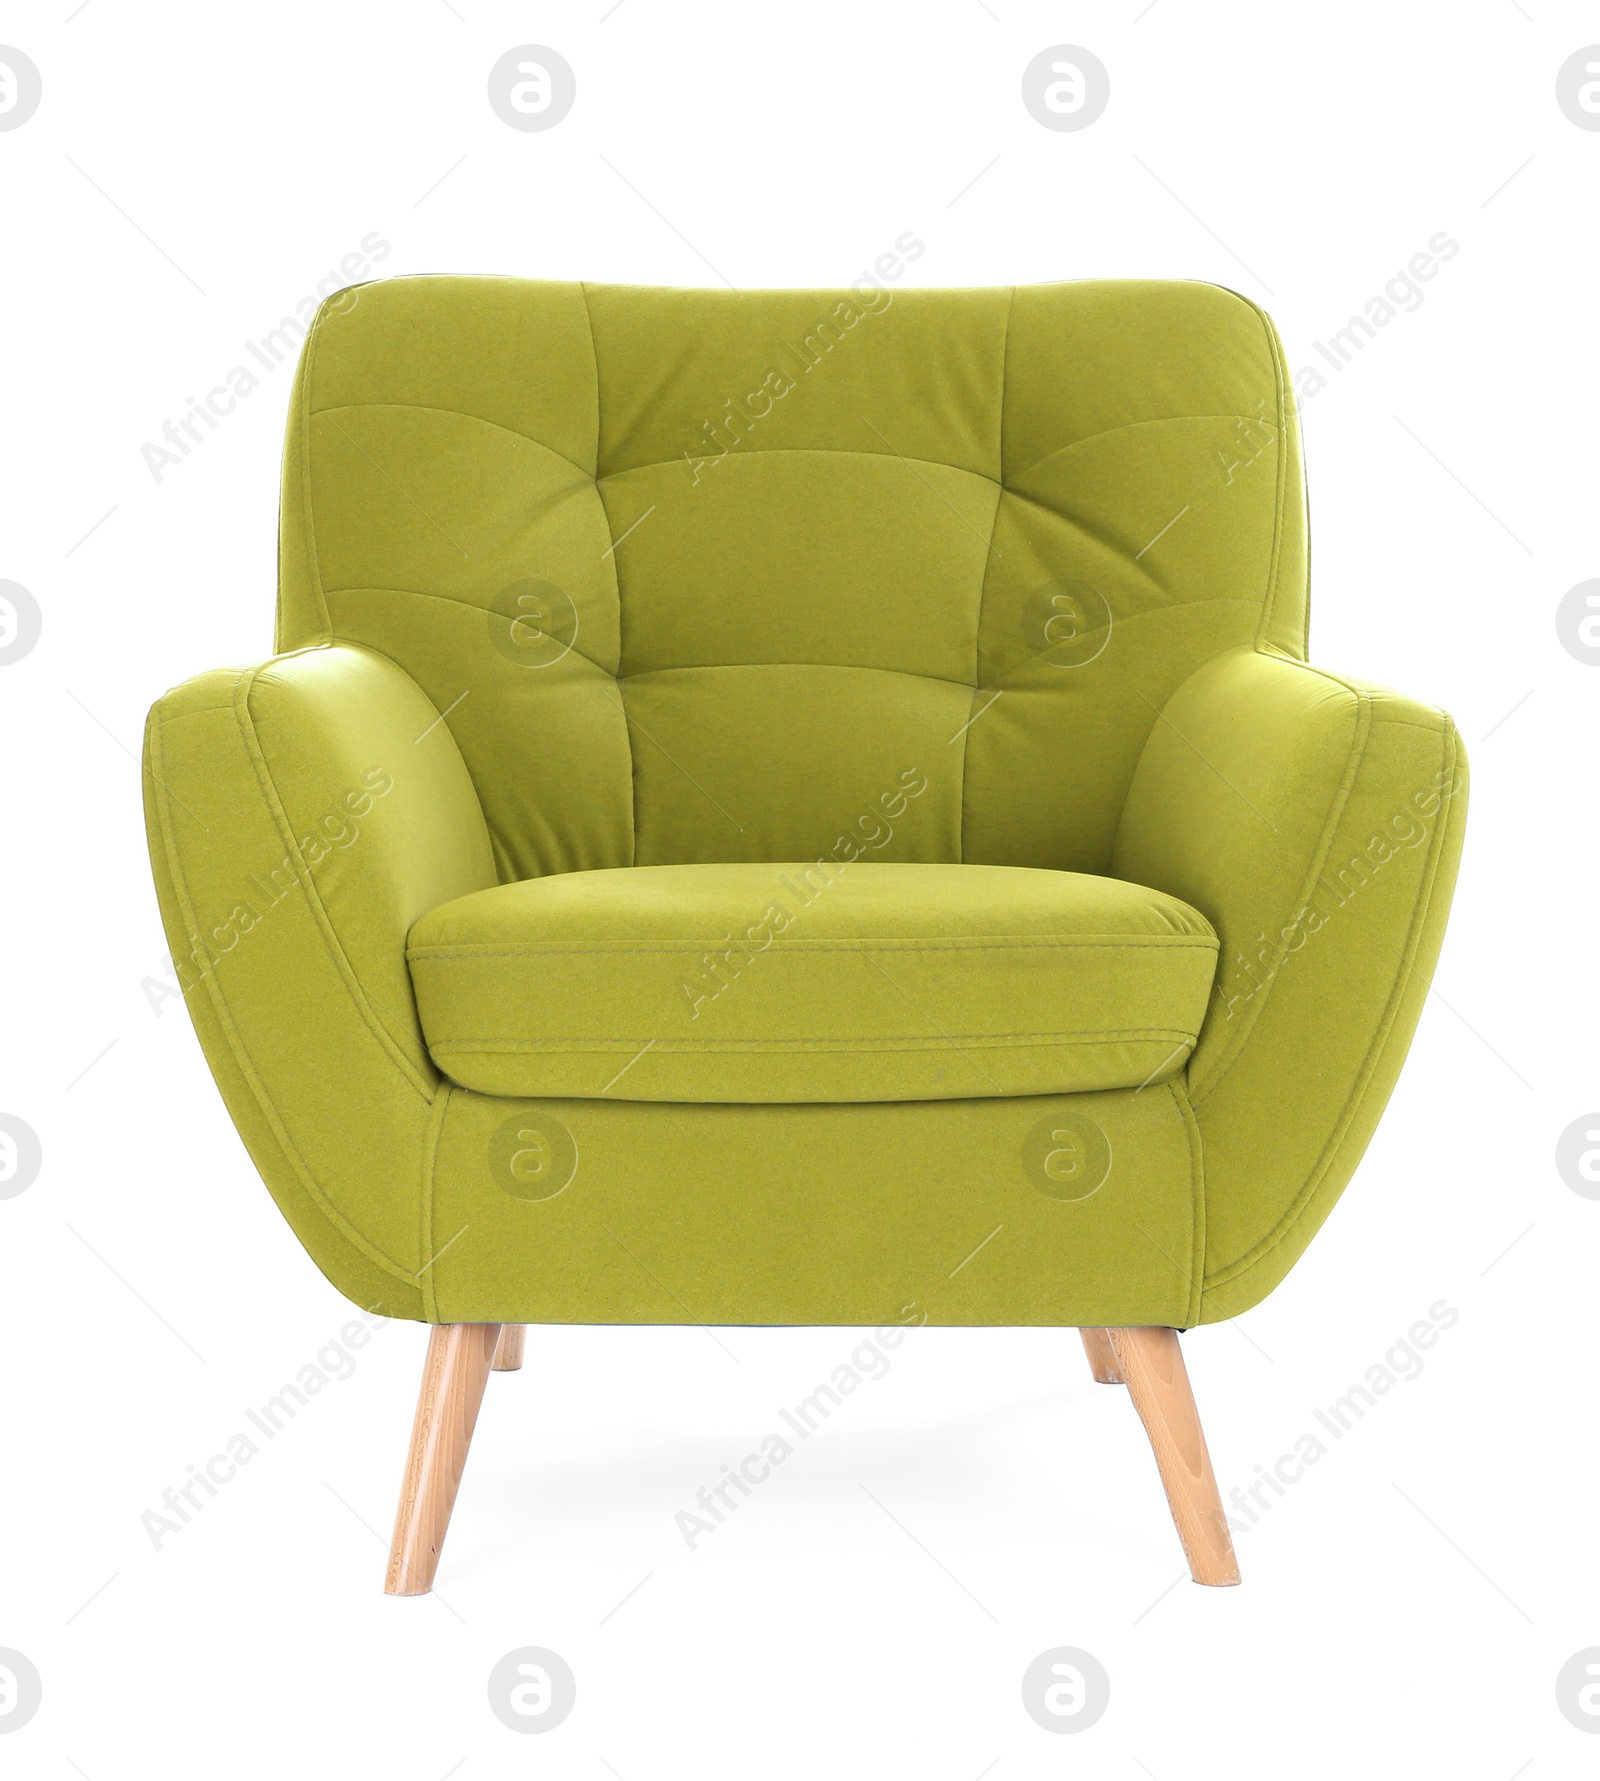 Image of One comfortable pear color armchair isolated on white